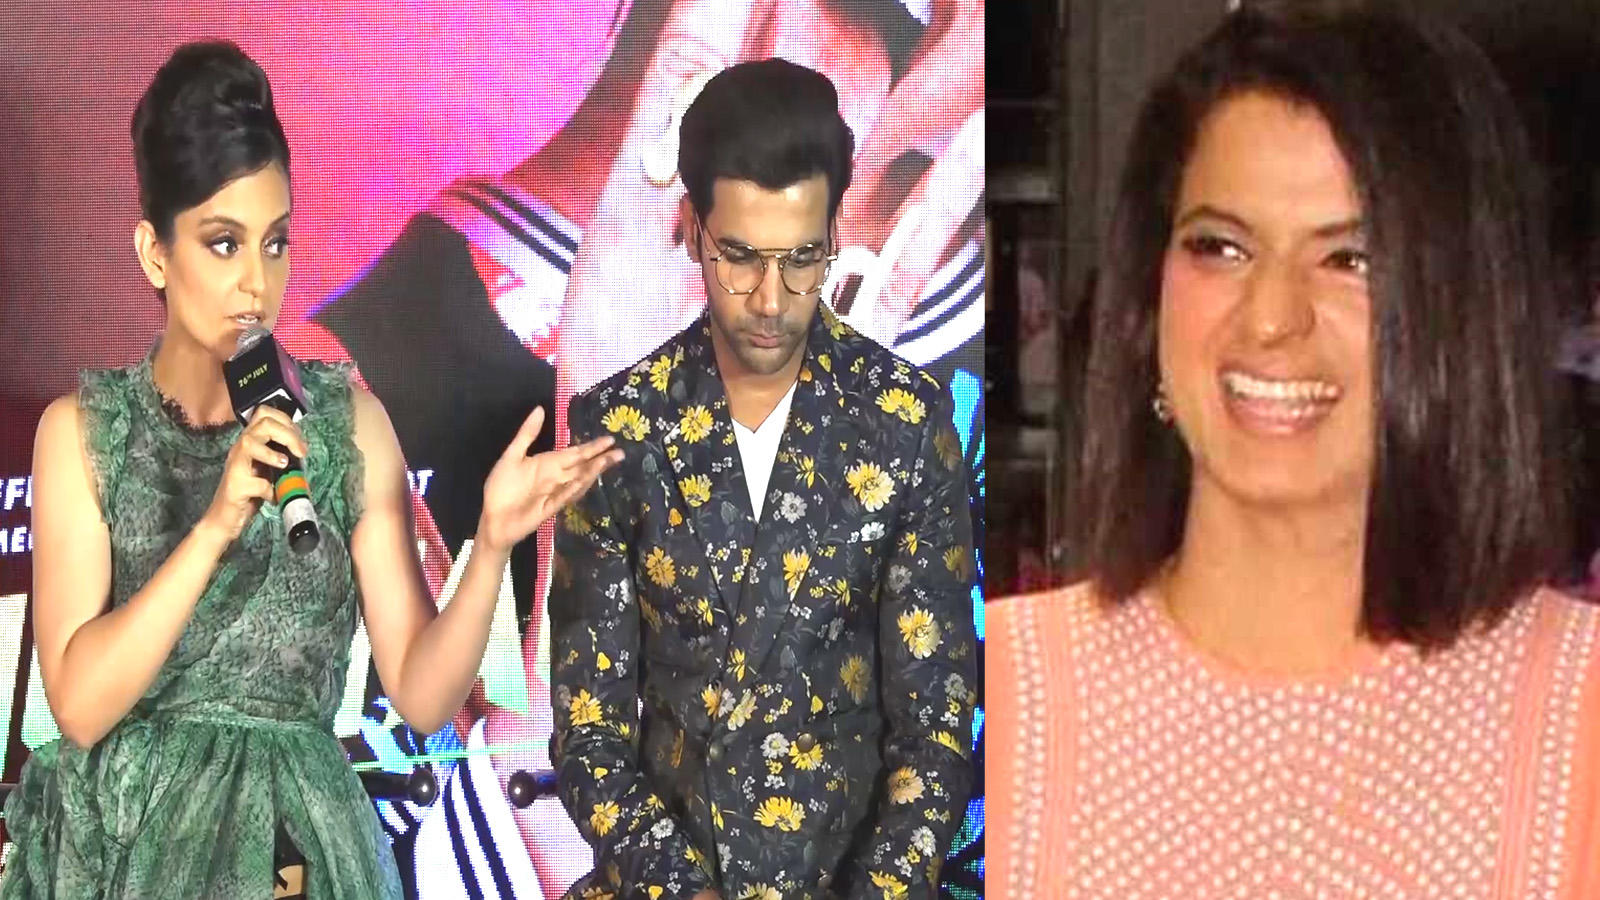   K Kangana Ranaut will not apologize: Rangoli Chandel reacts to his sister's ugly fight against a reporter 